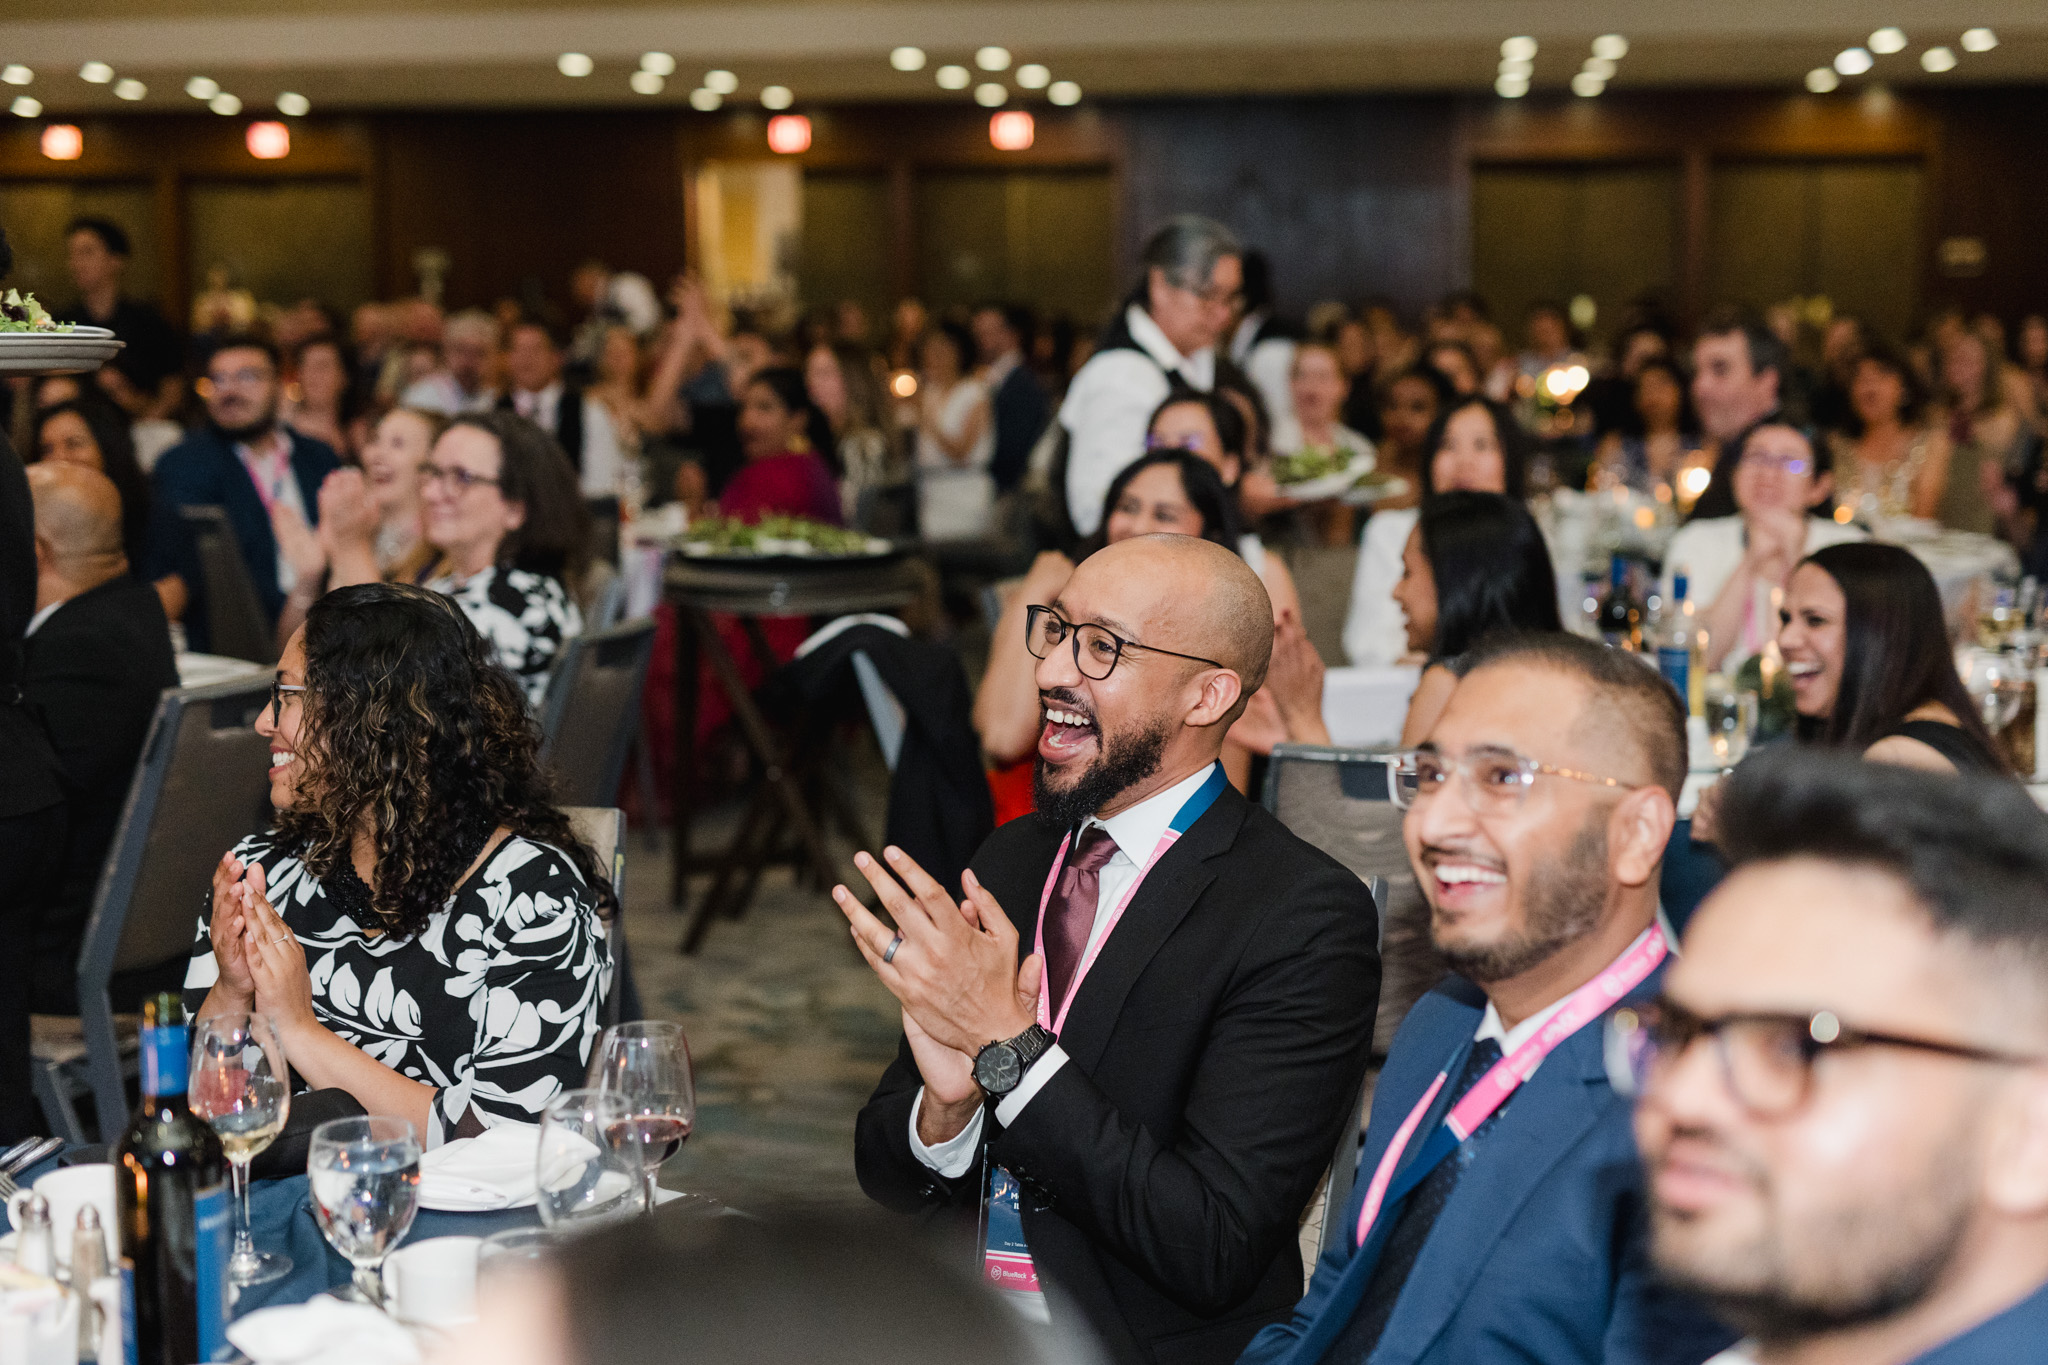 A group of people, seated in a banquet hall, smile and clap during the event. Some have glasses of wine on the table in front of them. The background, captured perfectly in corporate photography style, is filled with more attendees and waitstaff.